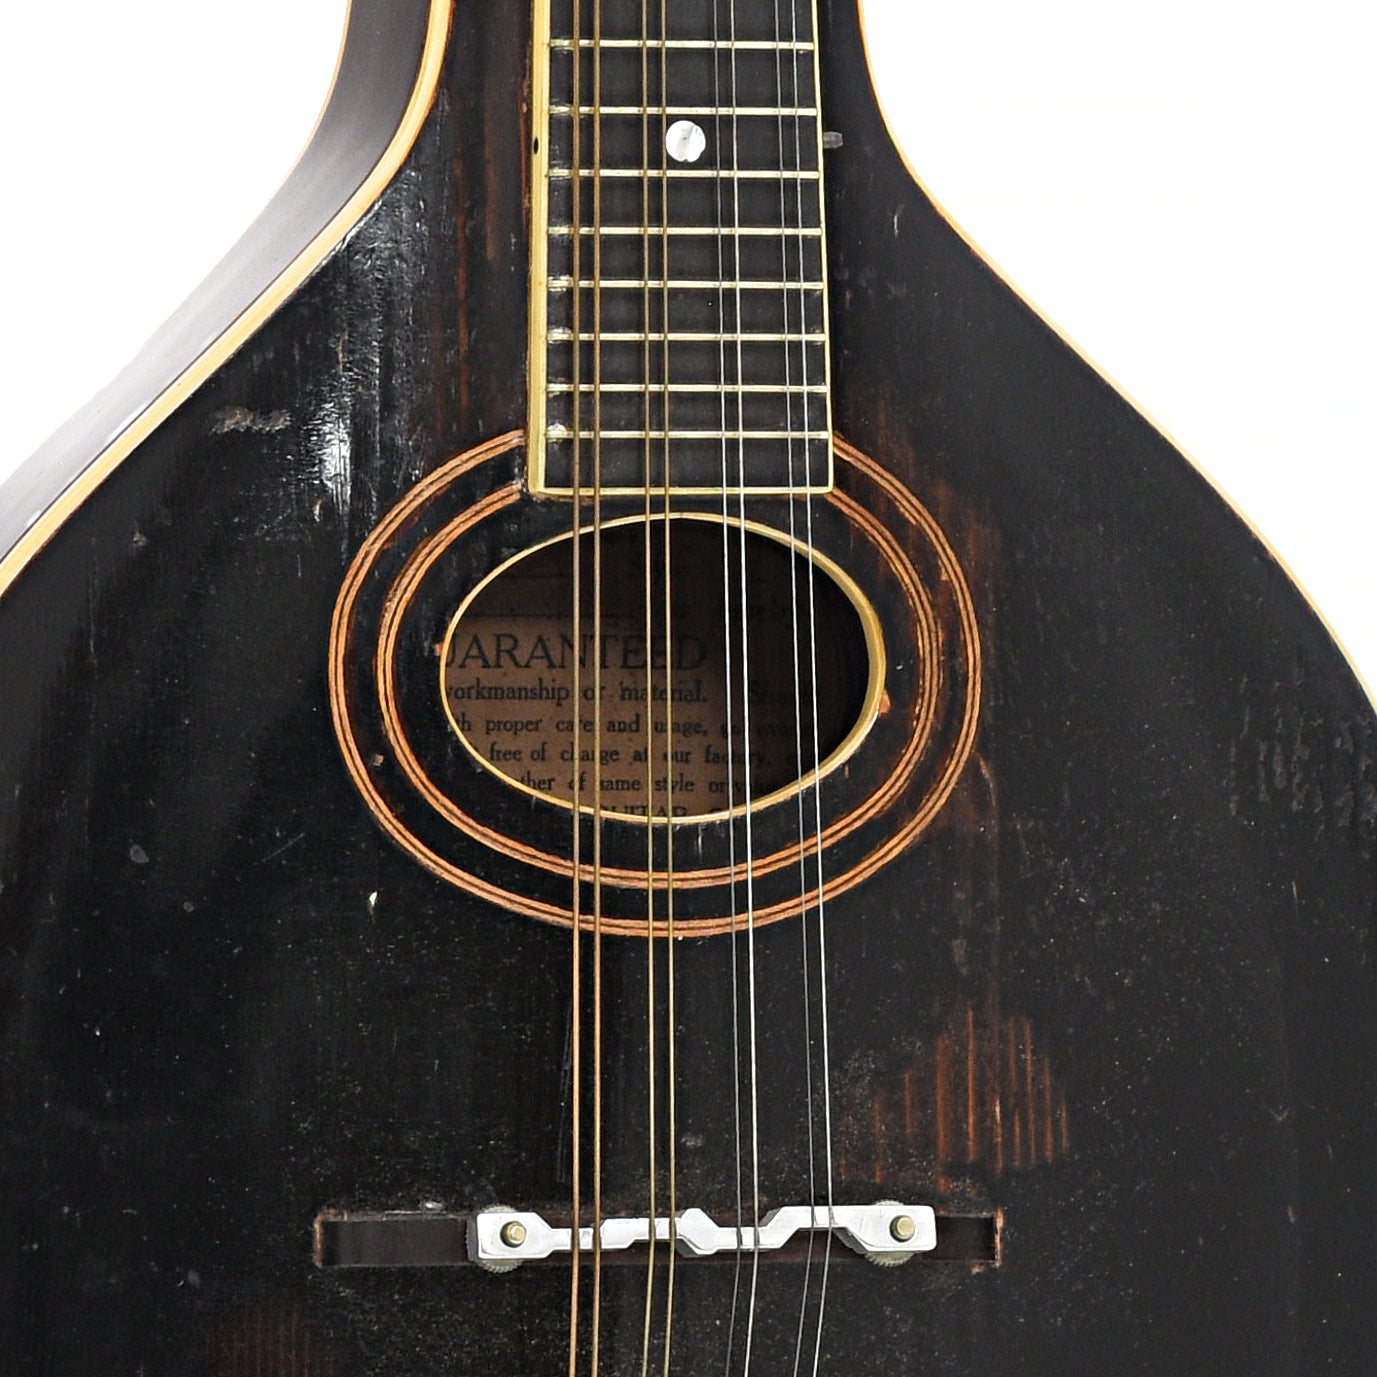 Soundhole and bridge of Gibson A-2 